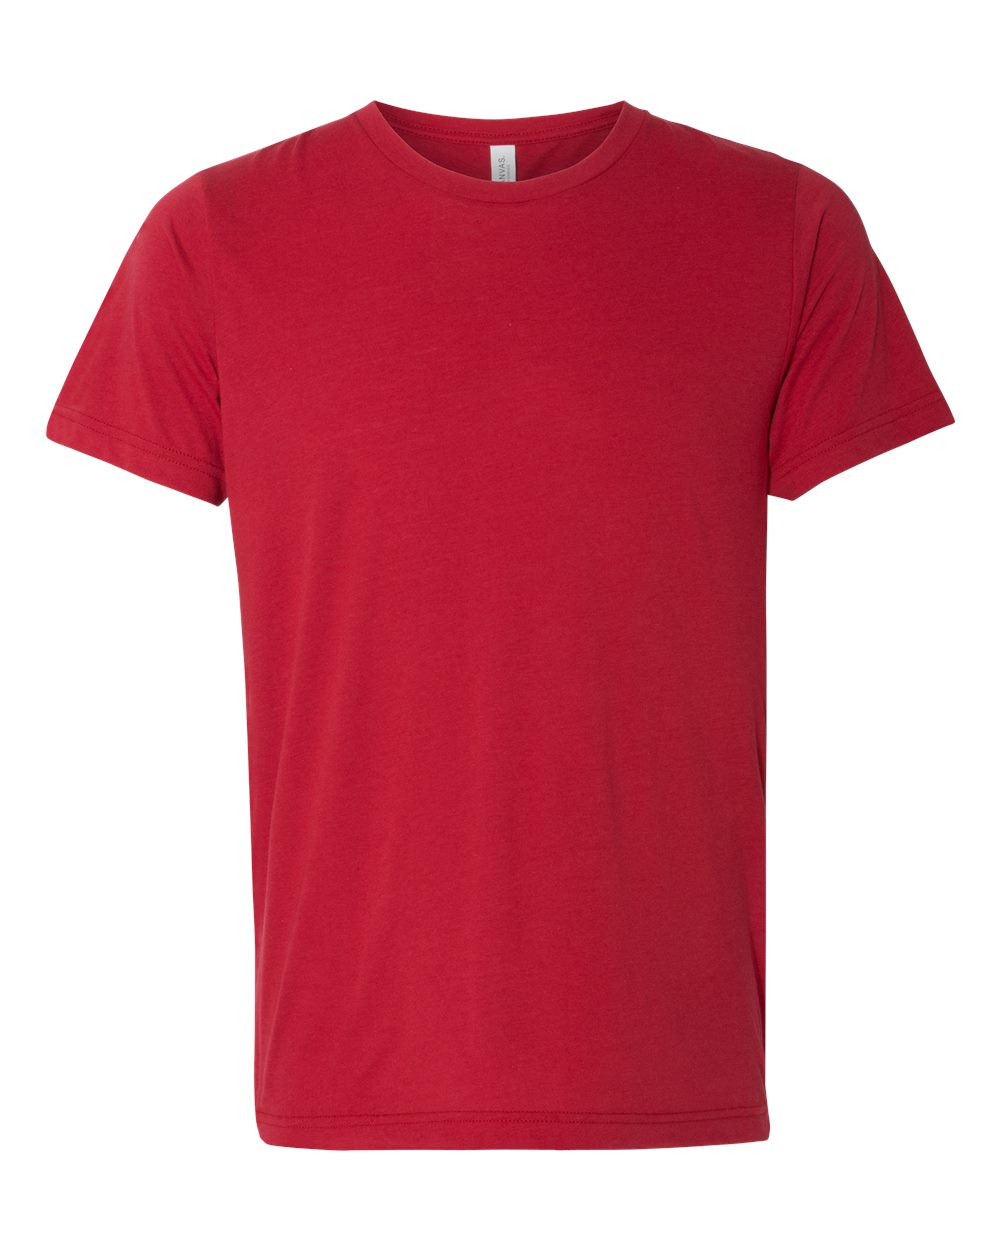 Bella + Canvas Triblend Tee (3413) in Solid Red Triblend